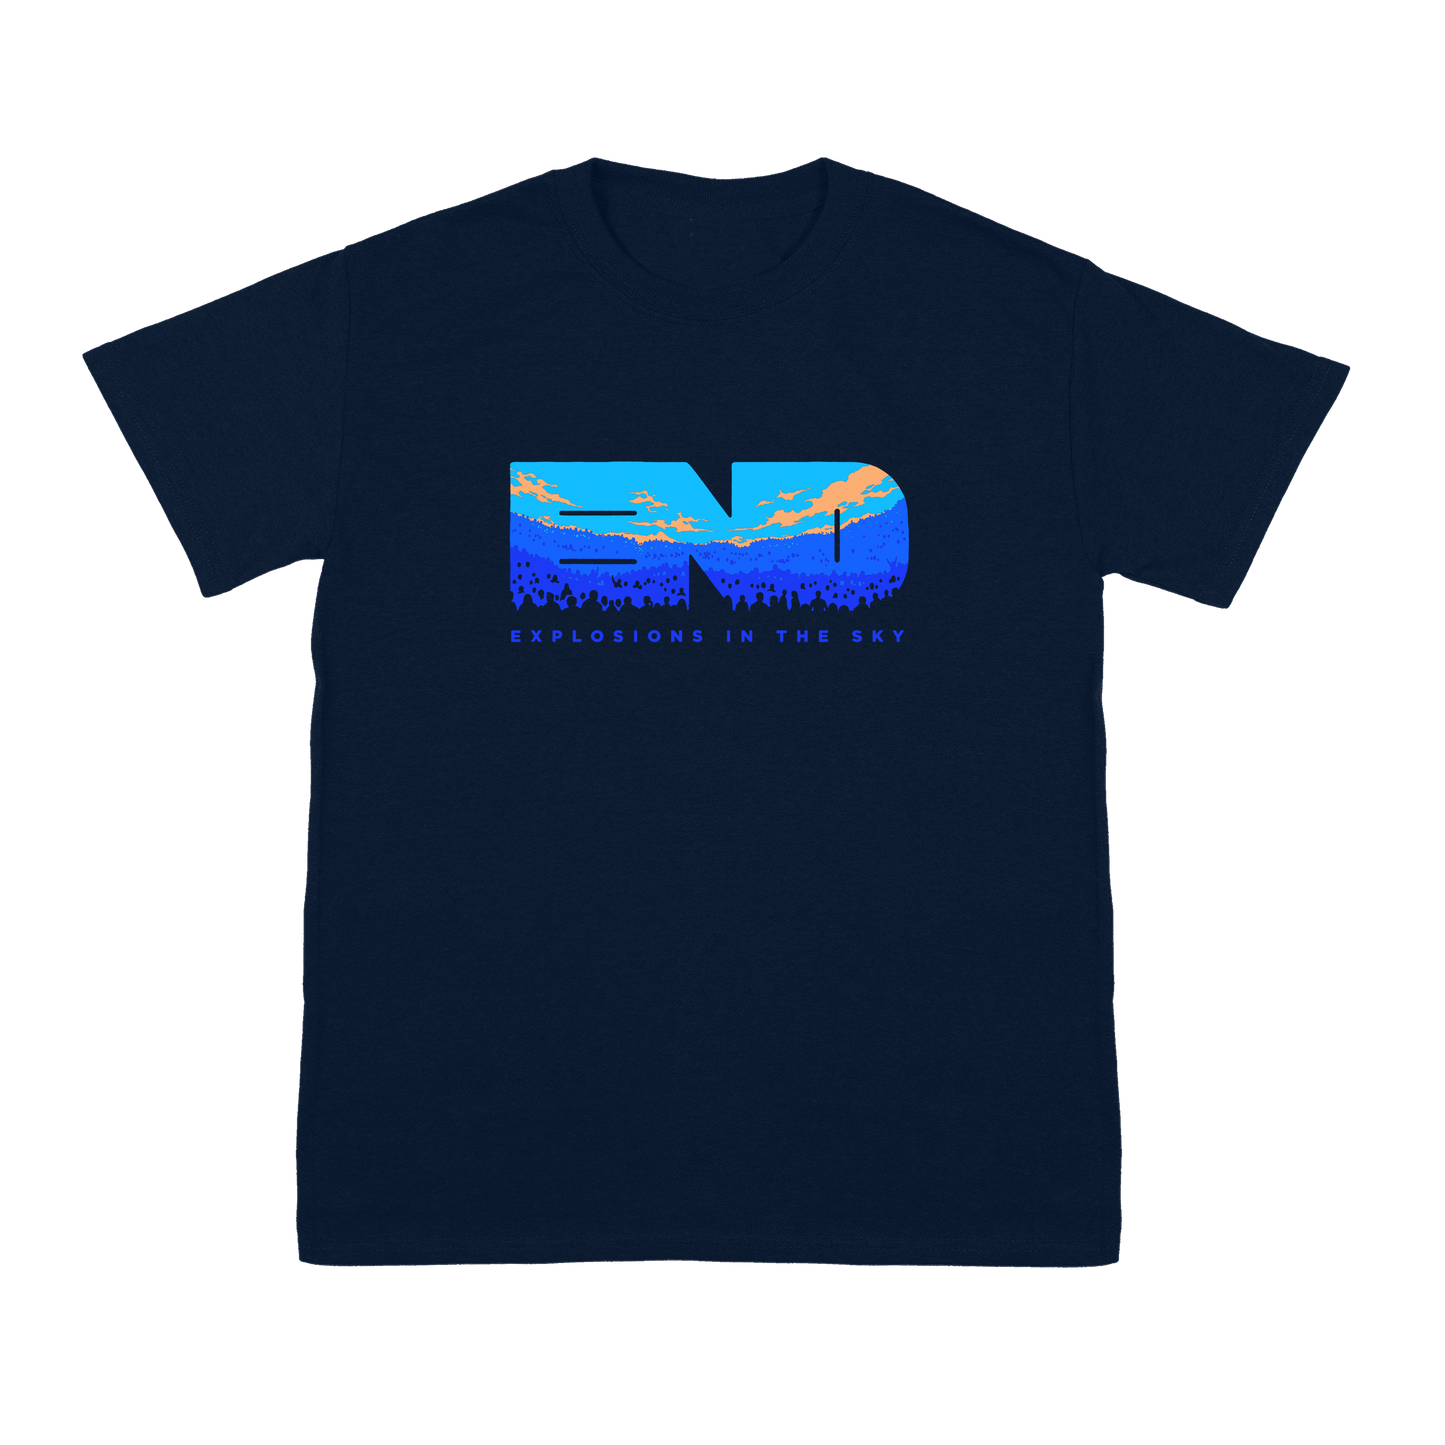 END Forest Navy Blue Tee